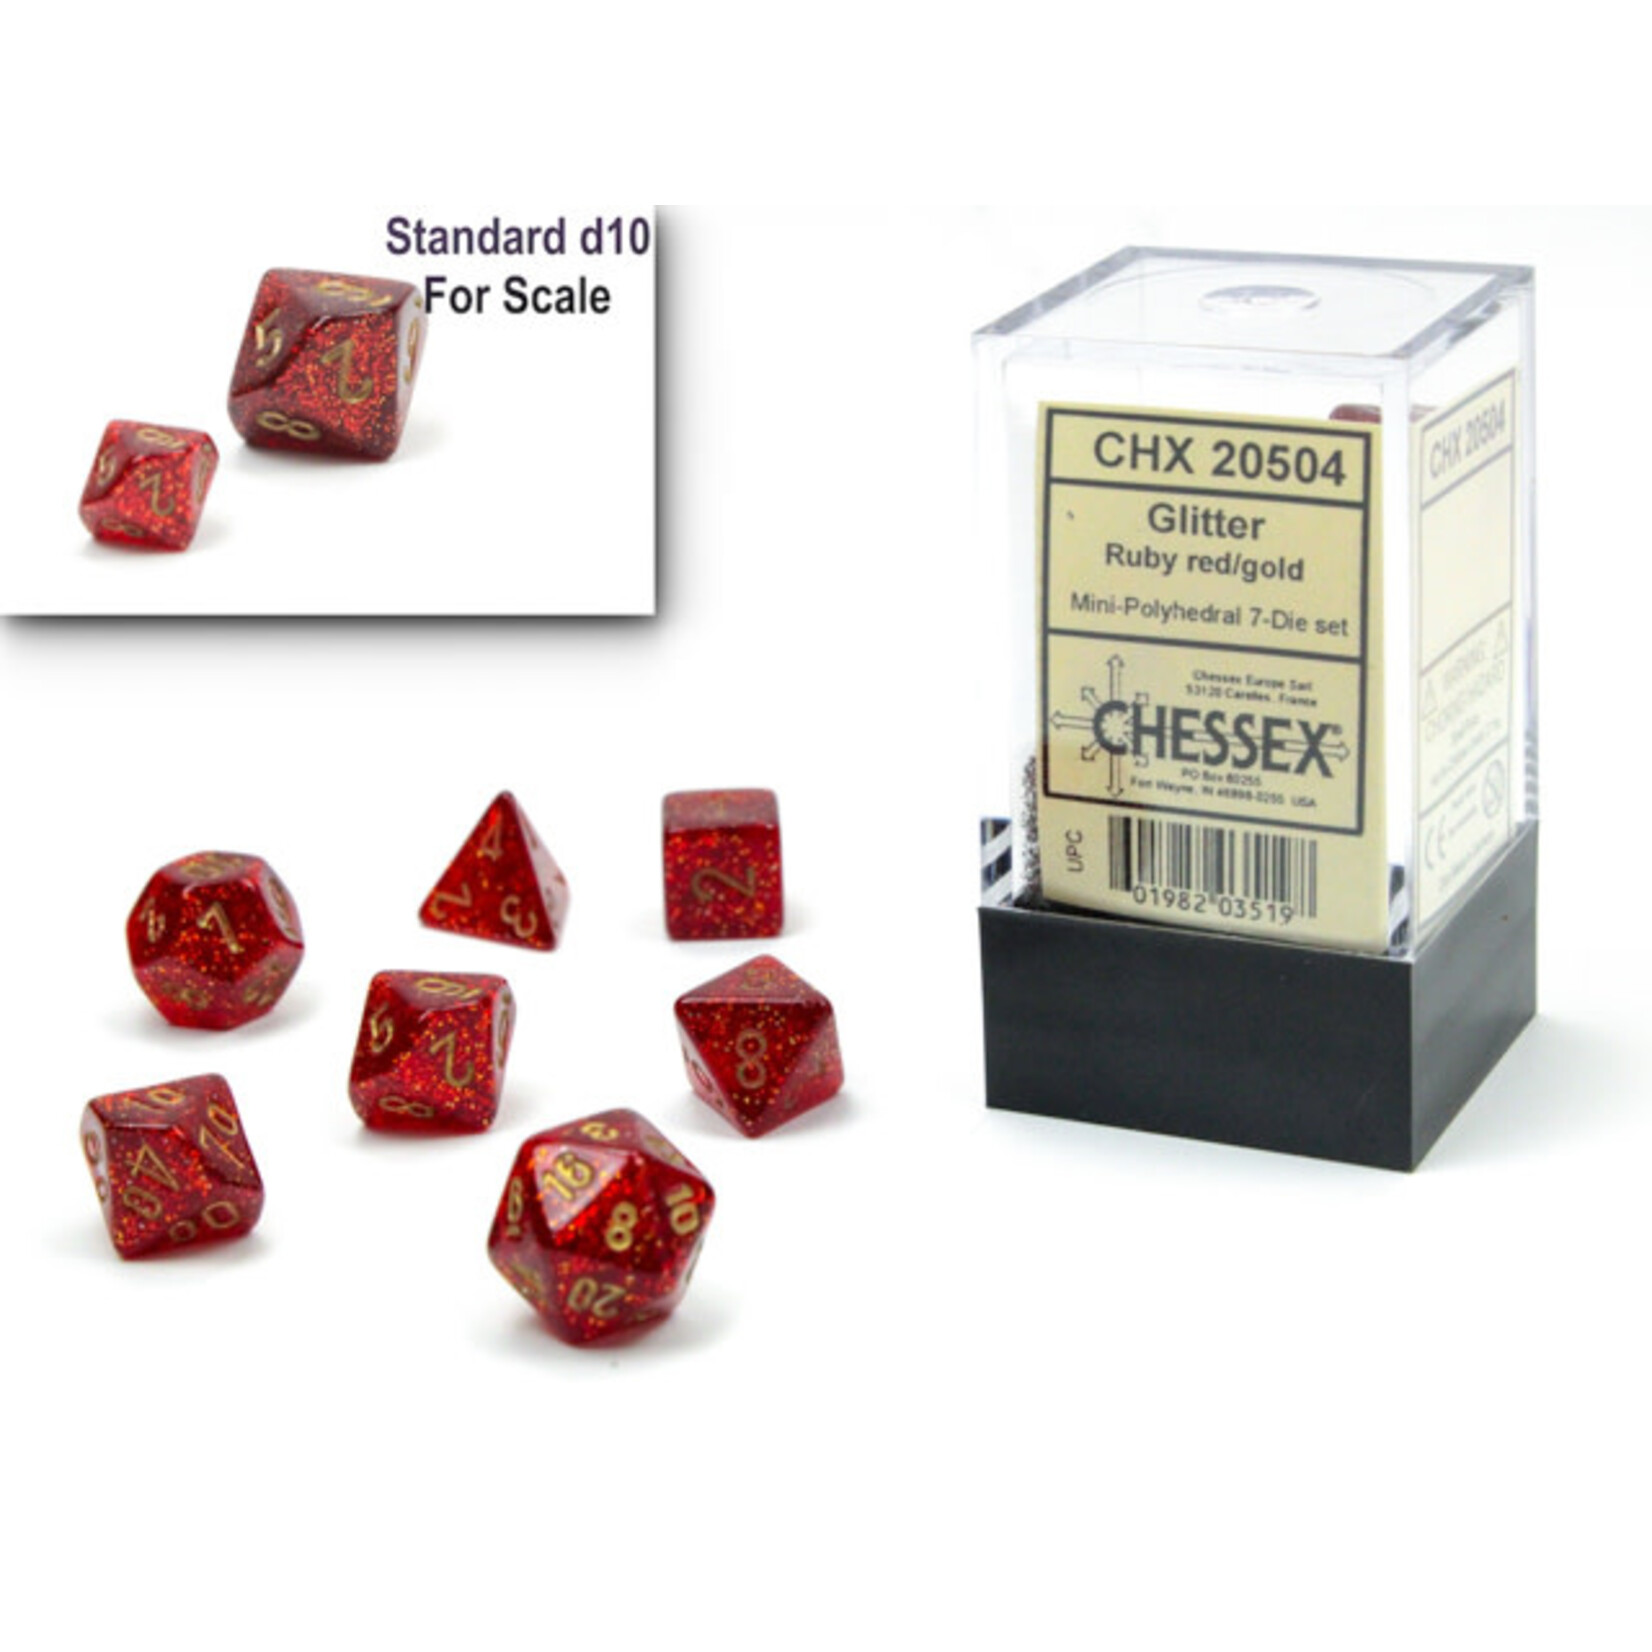 Chessex Glitter Mini-hedral™ Ruby Red/gold 7-Die Set